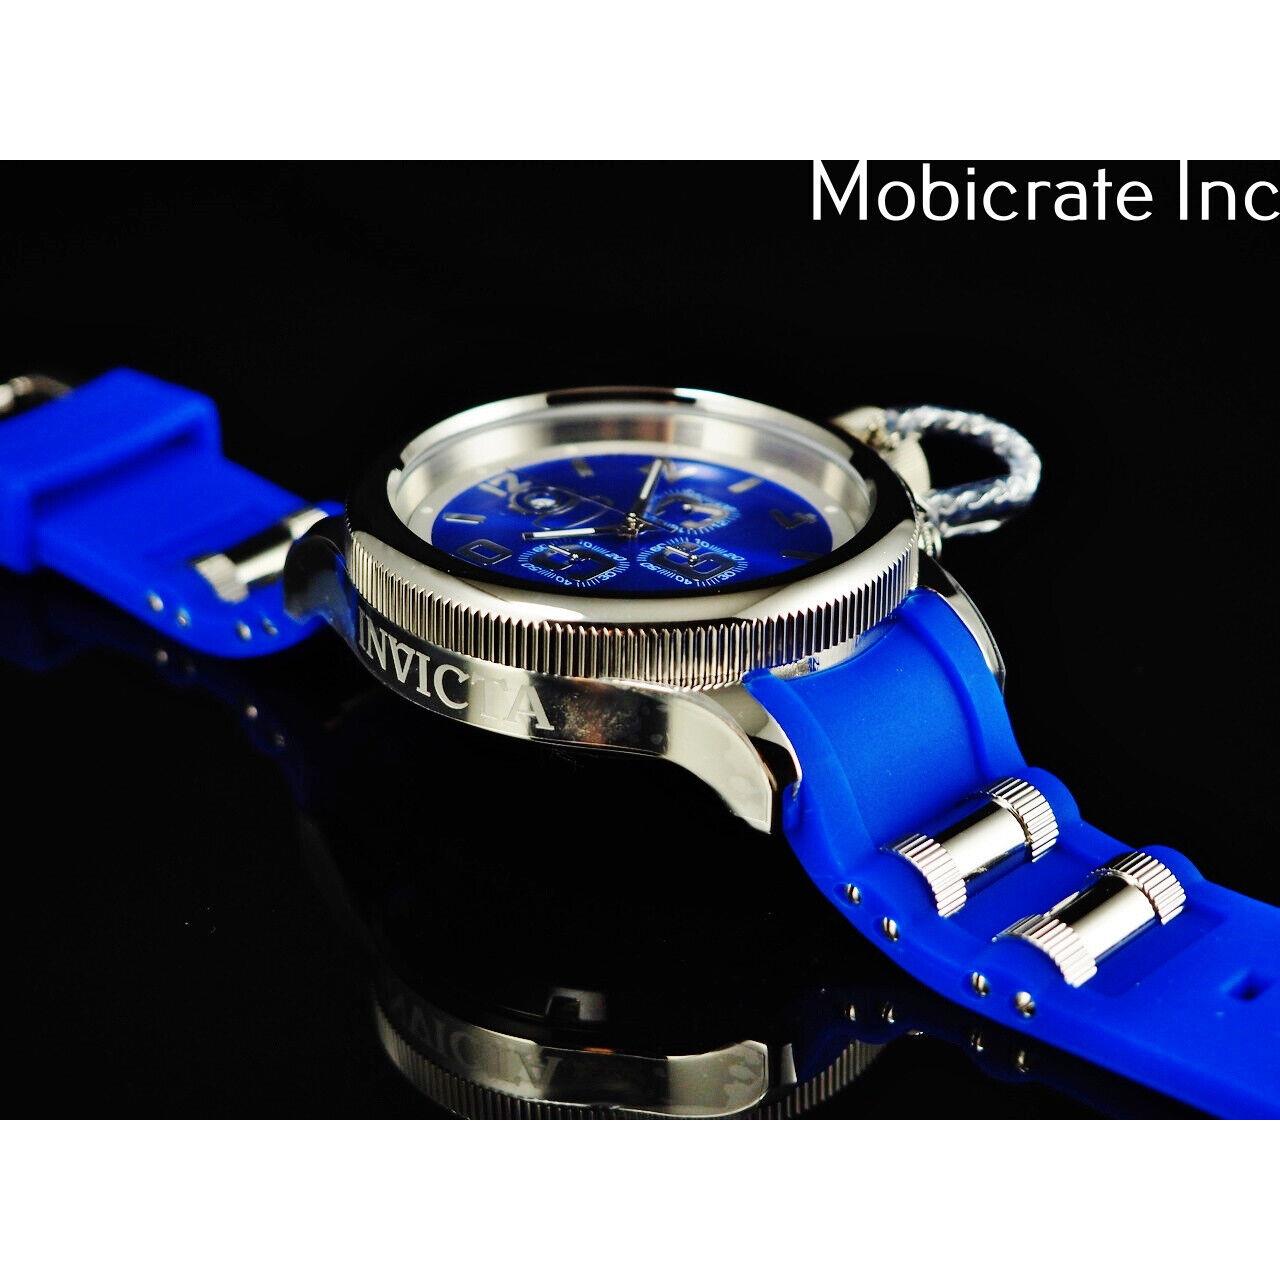 Invicta watch Russian Diver - Blue Dial, Blue Band, Silver Bezel